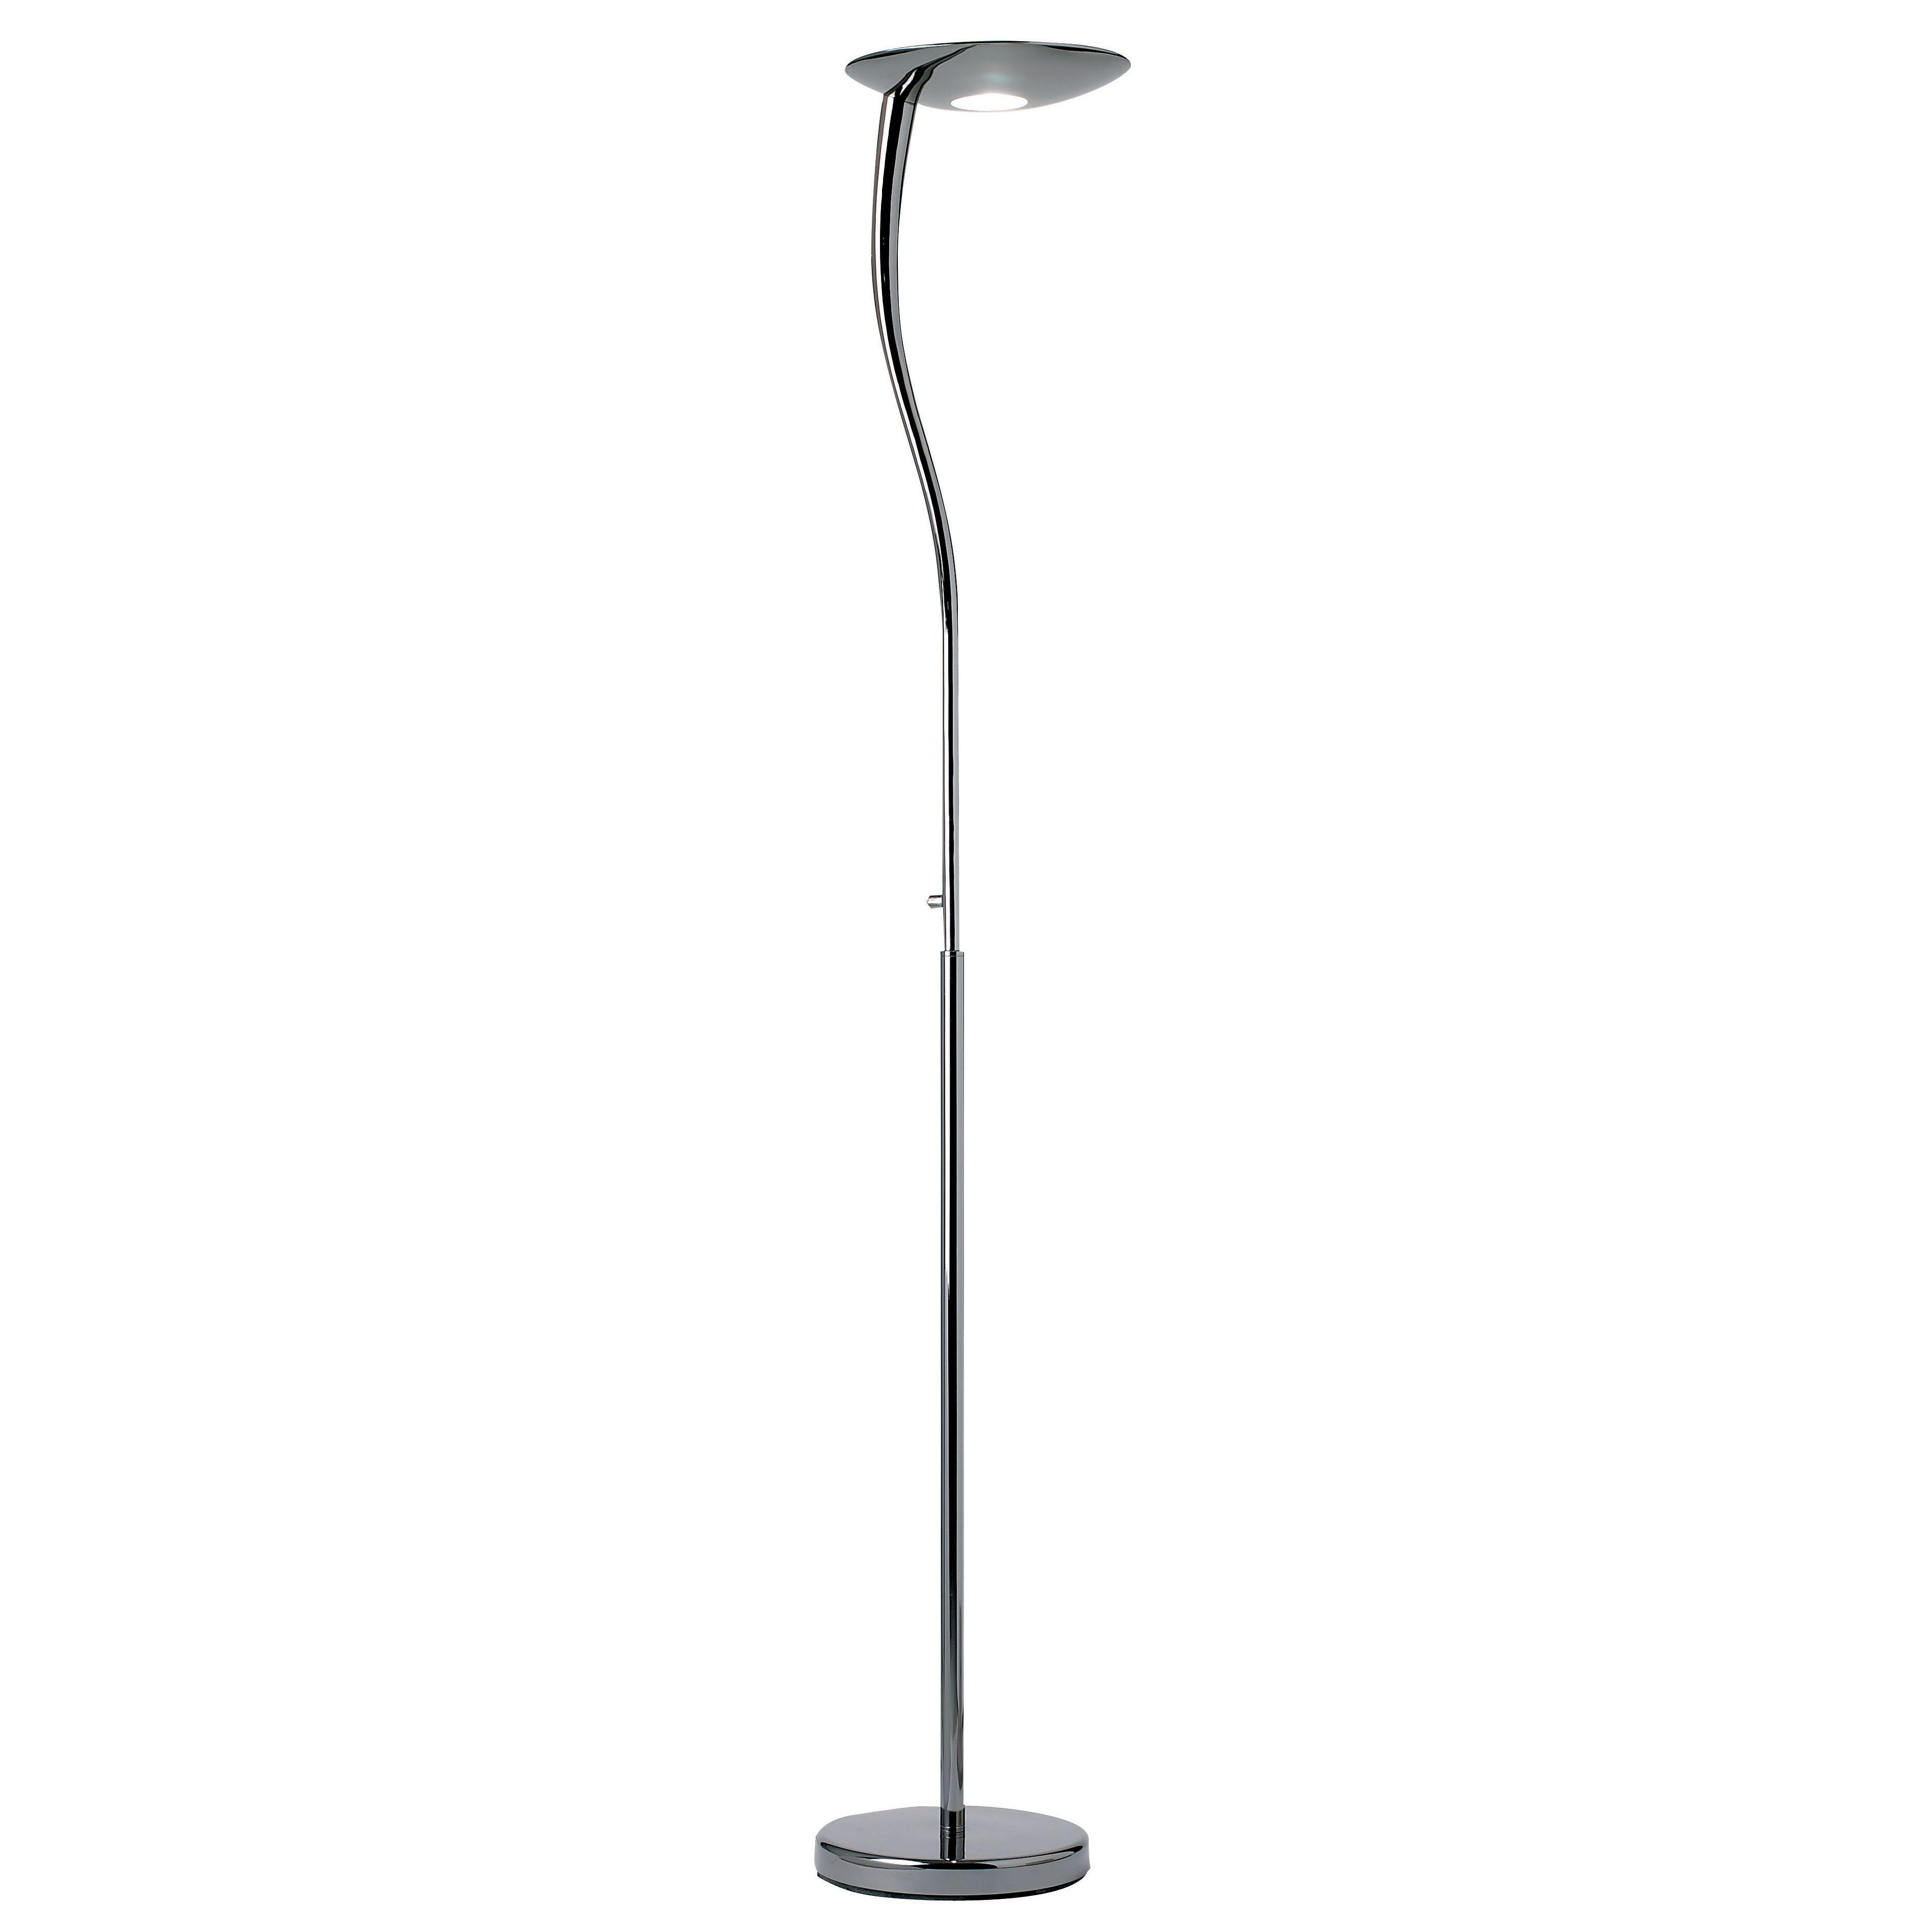 Black Chrome Halogen Floor Lamp Dimmer 300w Rimini Bc Lamps with dimensions 3796 X 3796